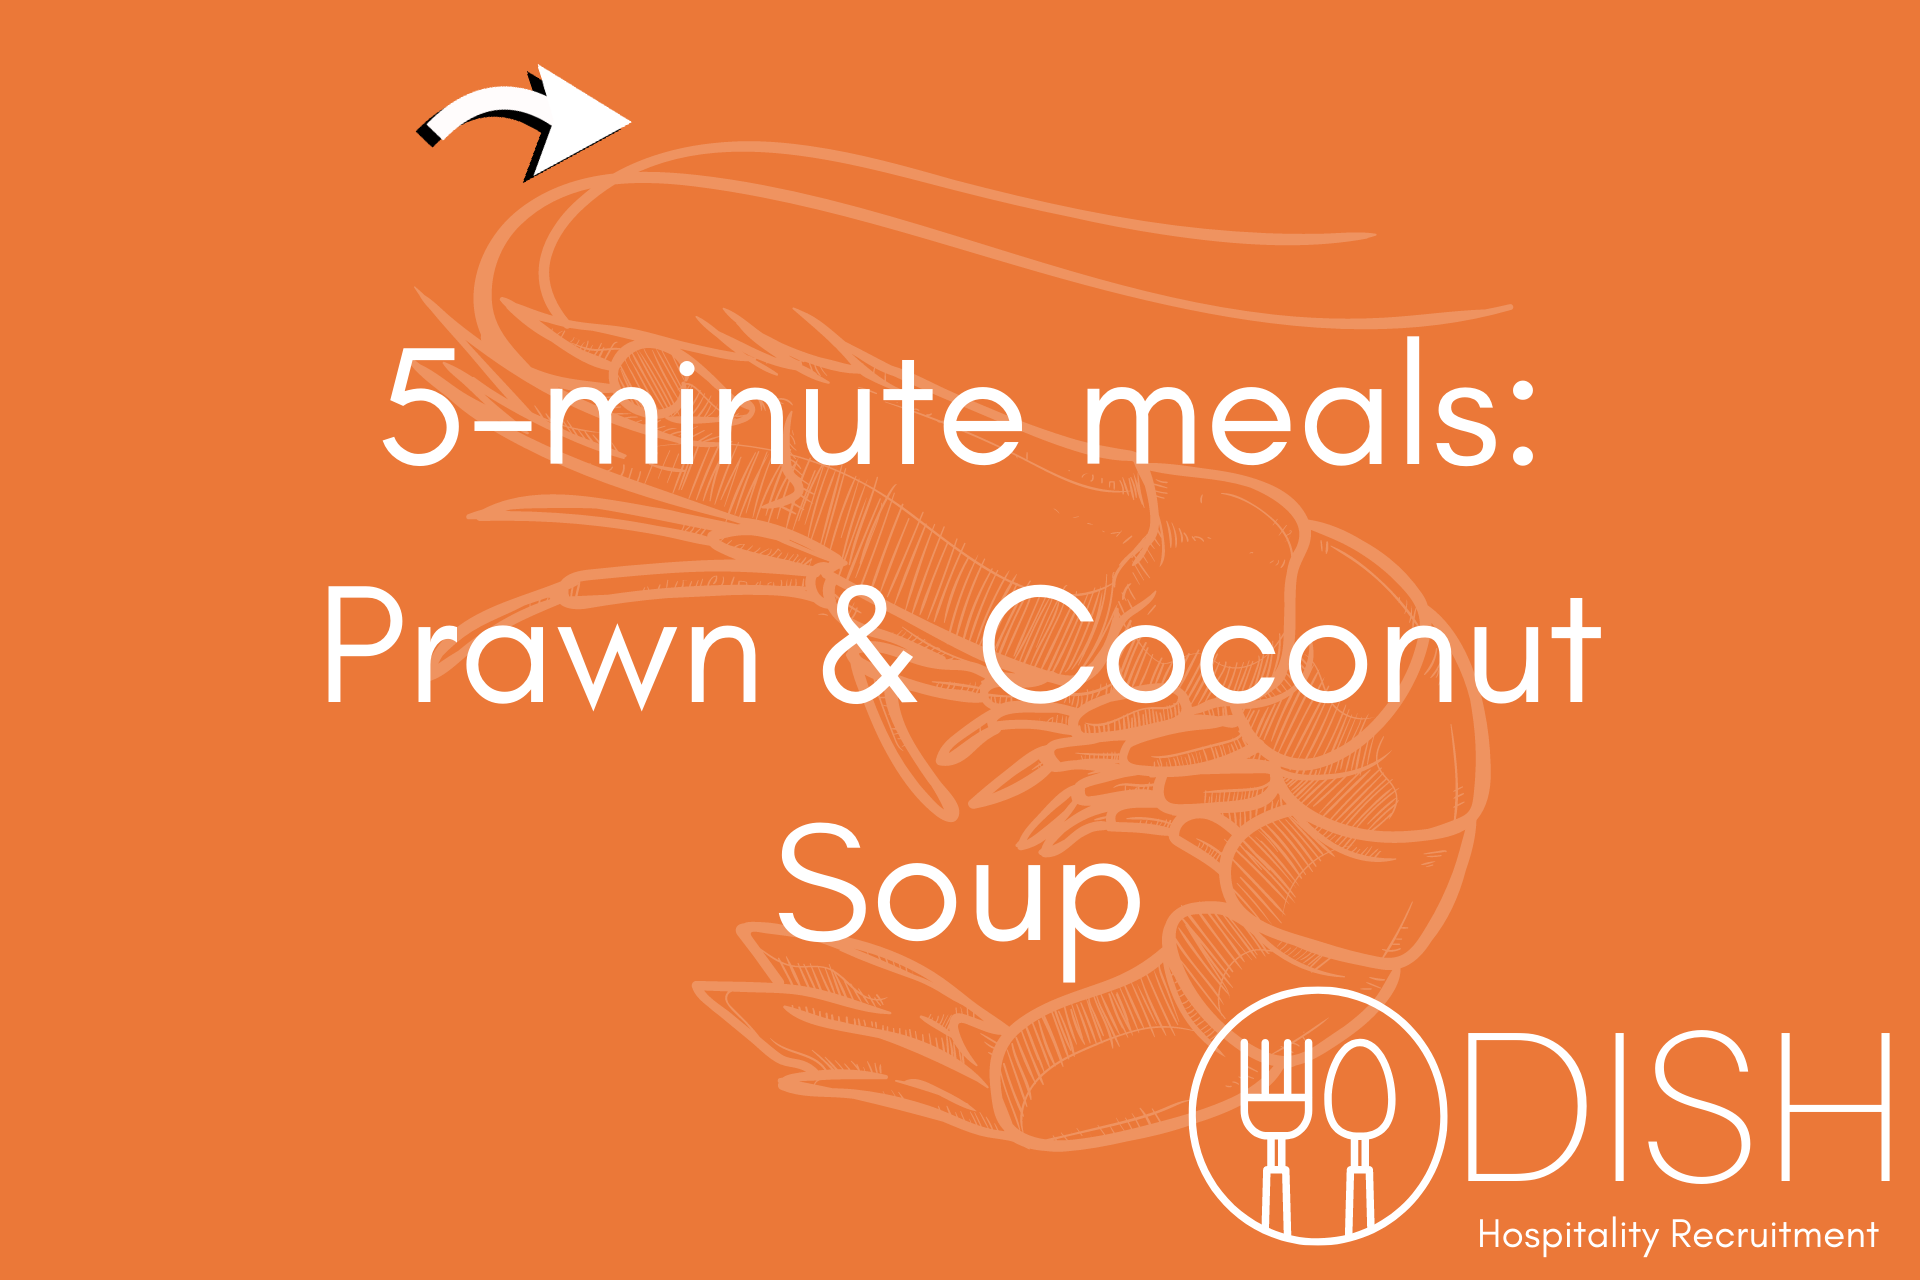 5 Minute Meal of the Week: Prawn & Coconut Soup